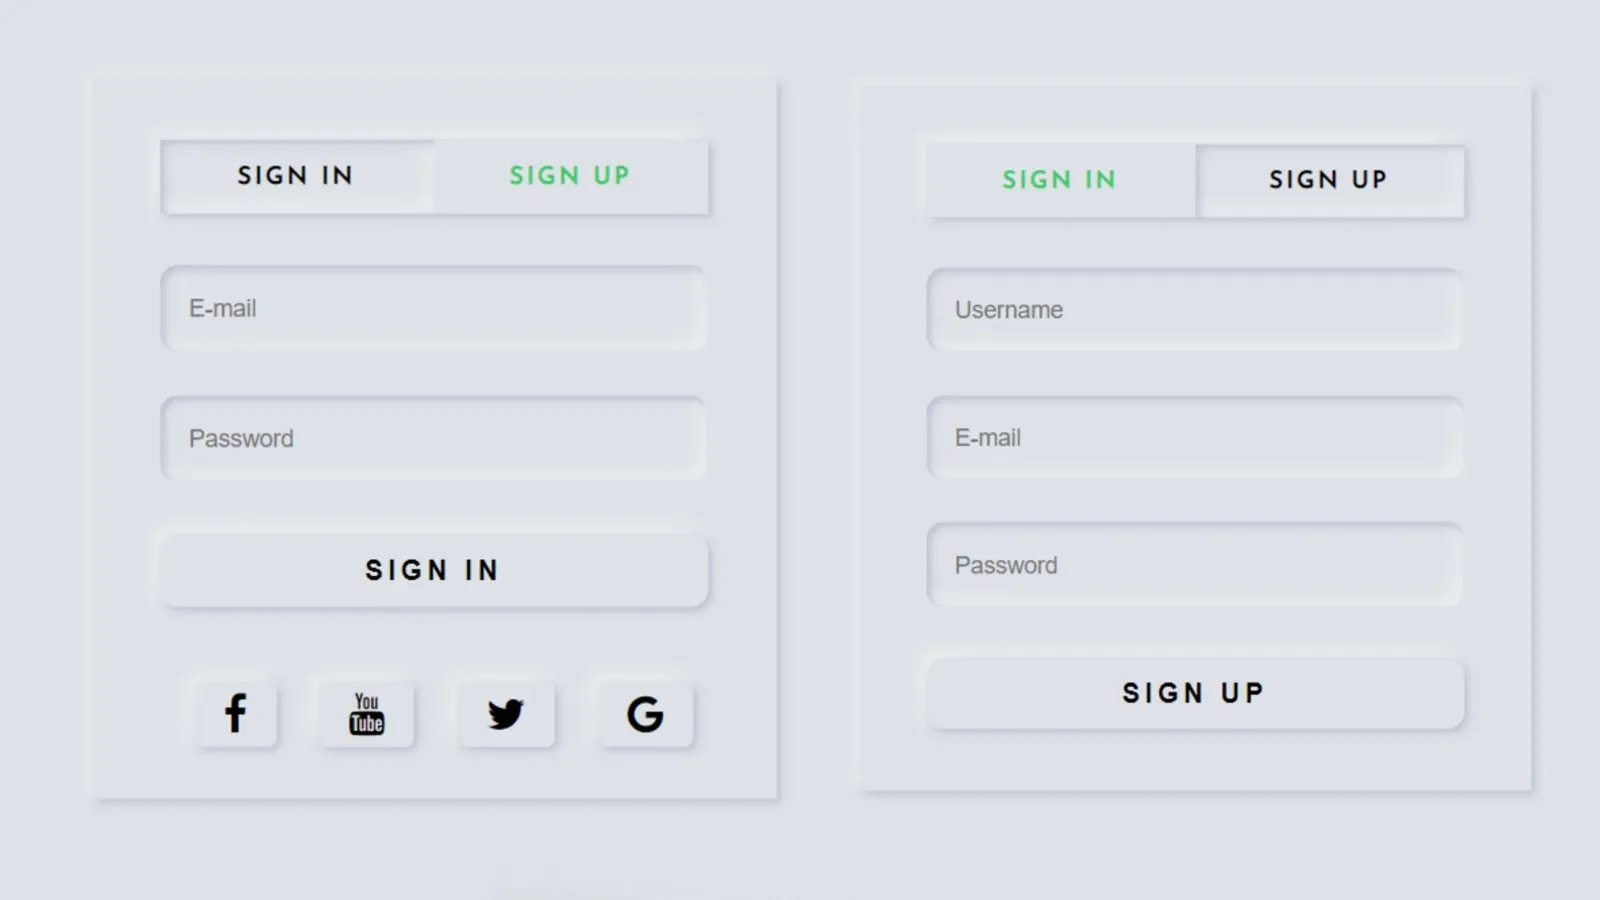 Free Course: Neumorphism Login Form UI Design using HTML, CSS, JavaScript, Neumorphism CSS, Code4education from CODE4EDUCATION